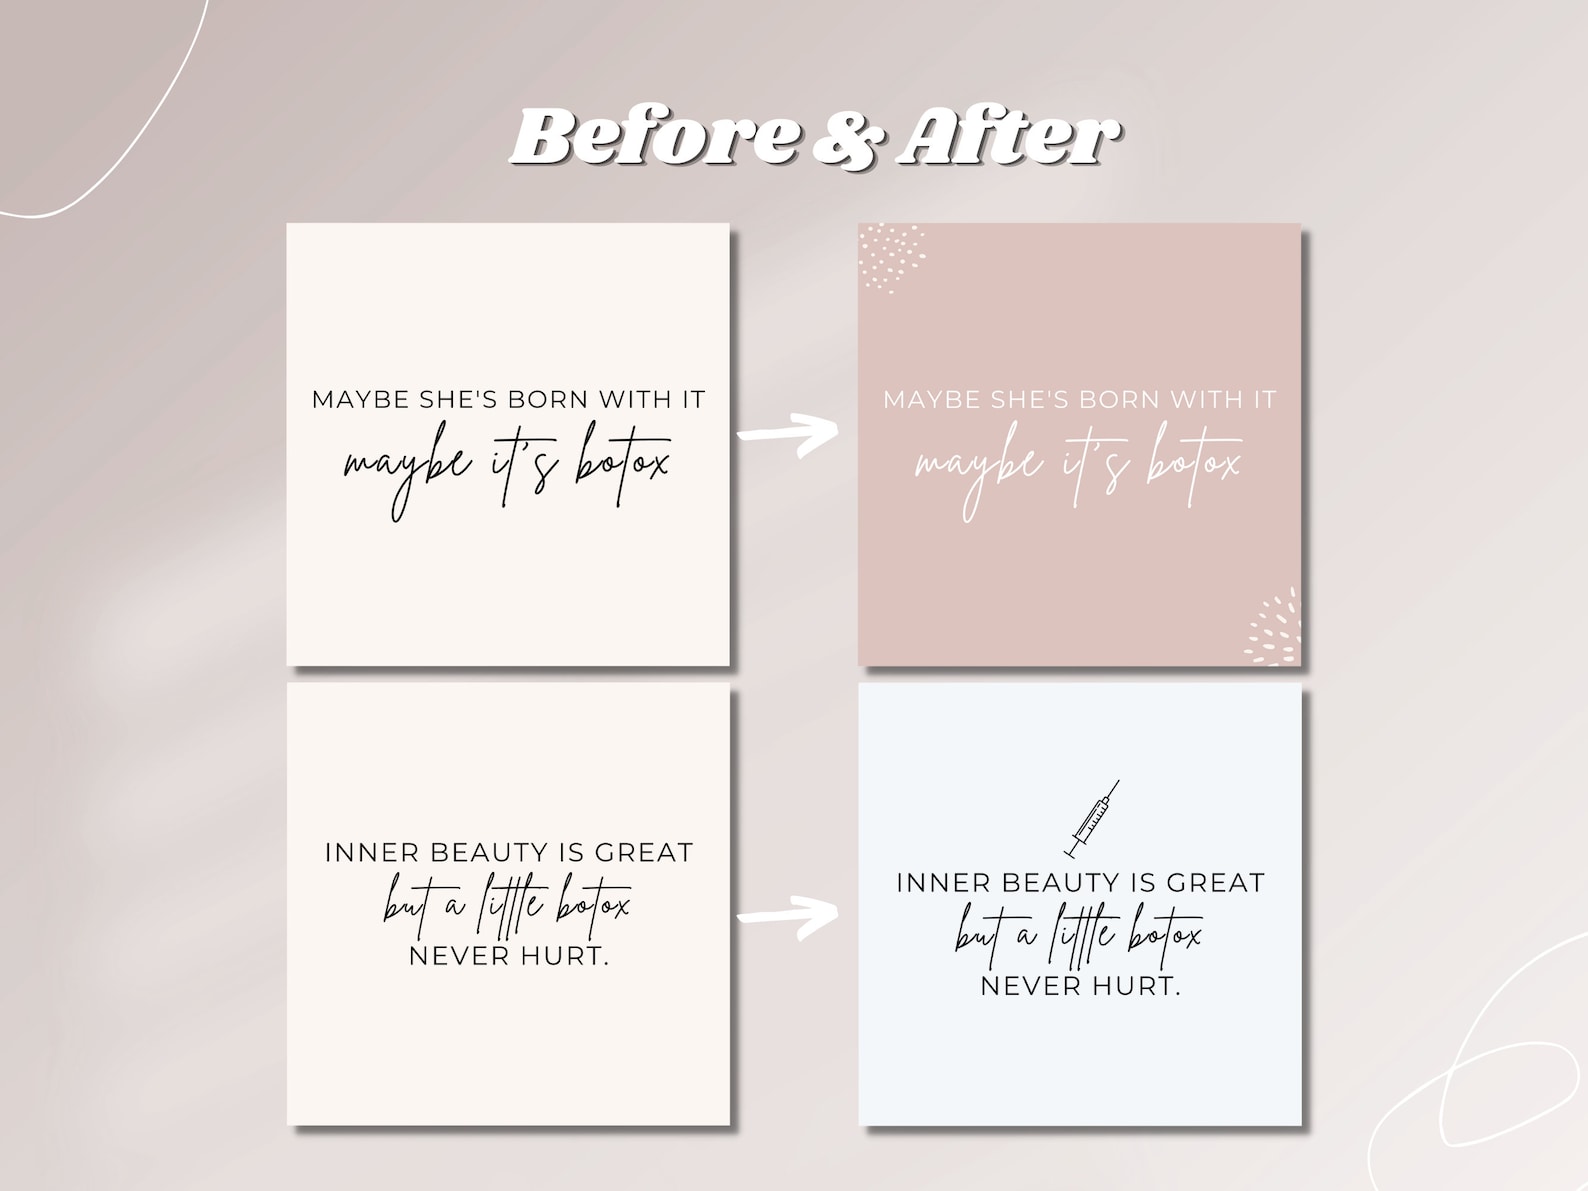 Botox Fillers Quotes Instagram Template Canva Editable - Etsy